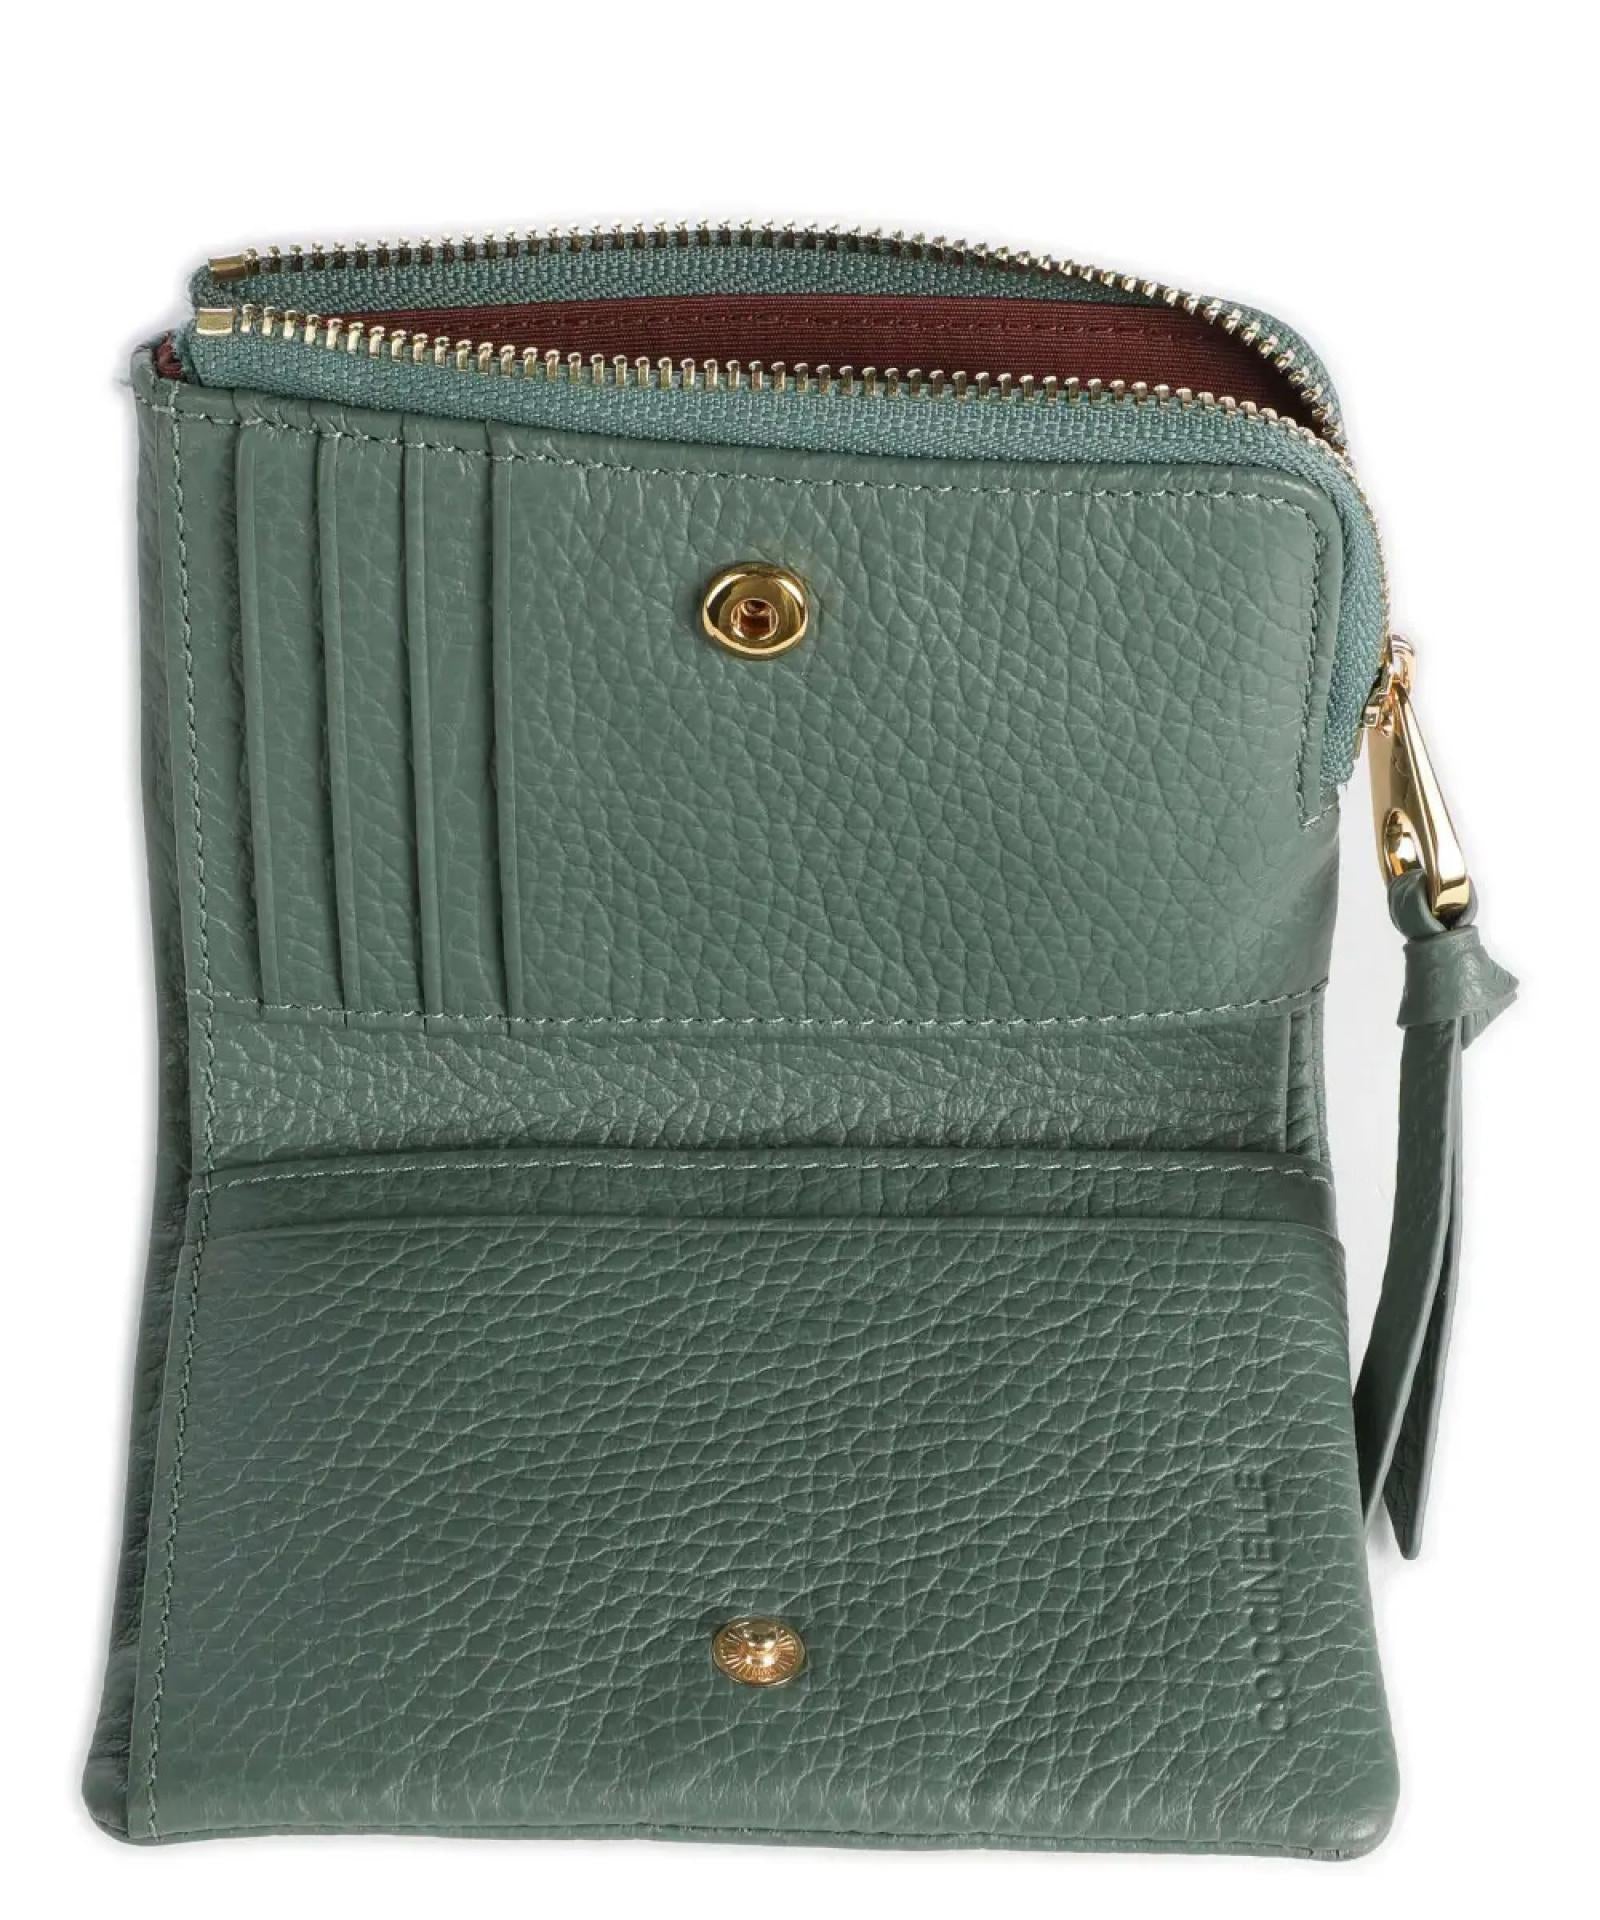 Coccinelle WALLET GRAINED LEATHER / KALE GREEN